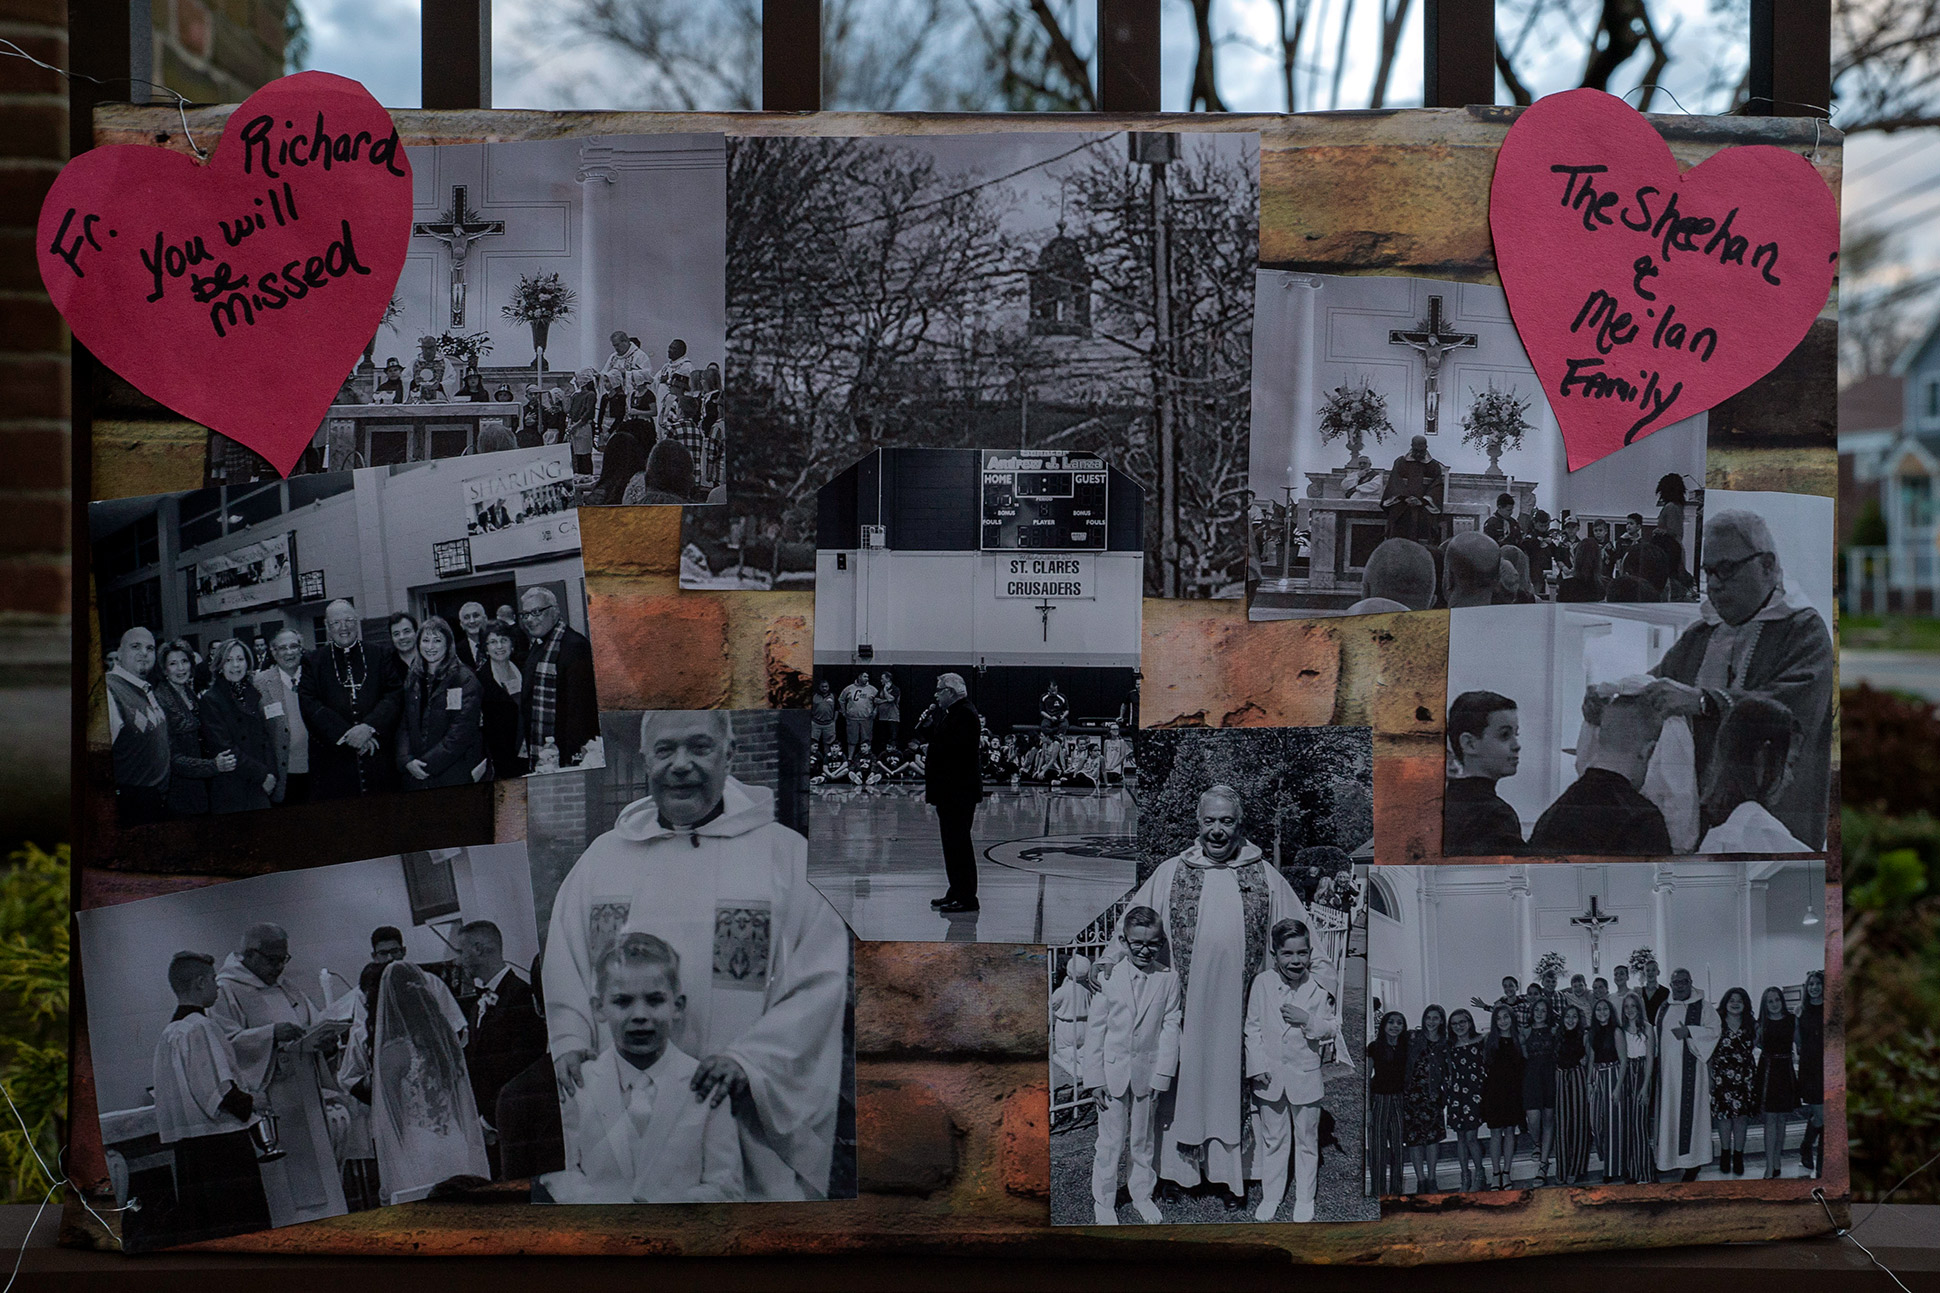 A of collage photographs left at a memorial for Monsignor Richard Guastella, who died from Covid-19 outside the doors of St. Clare Catholic Church in Staten Island, NY, April 10, 2020.